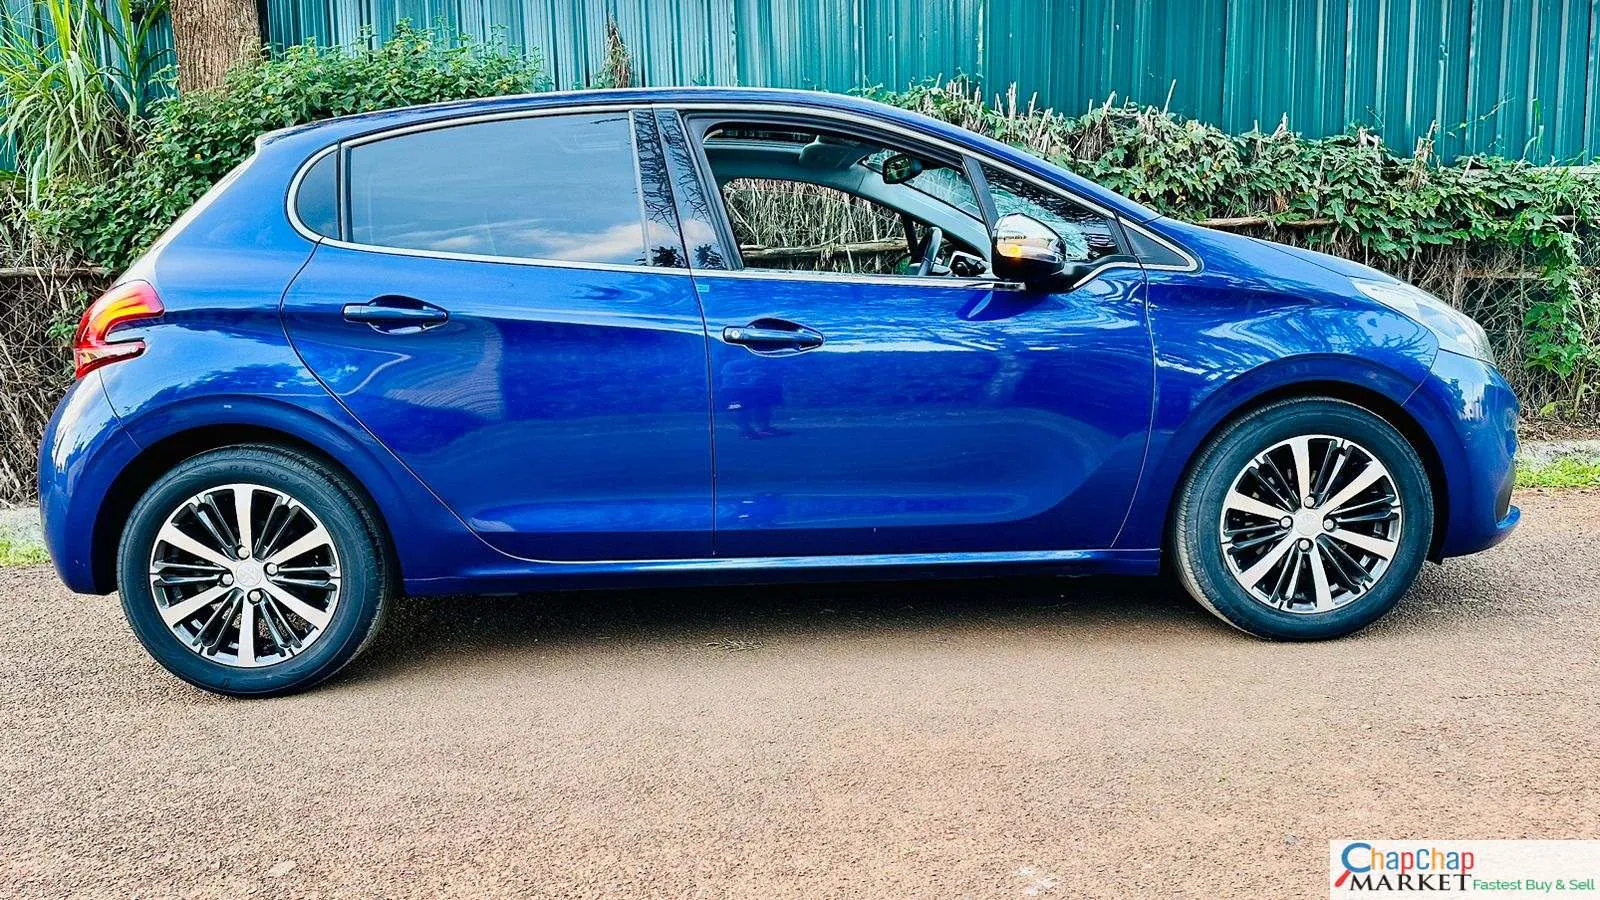 Peugeot 208 with sunroof Moonroof You ONLY Pay 30% Deposit Trade in Ok Wow Peugeot for sale in kenya hire purchase installments